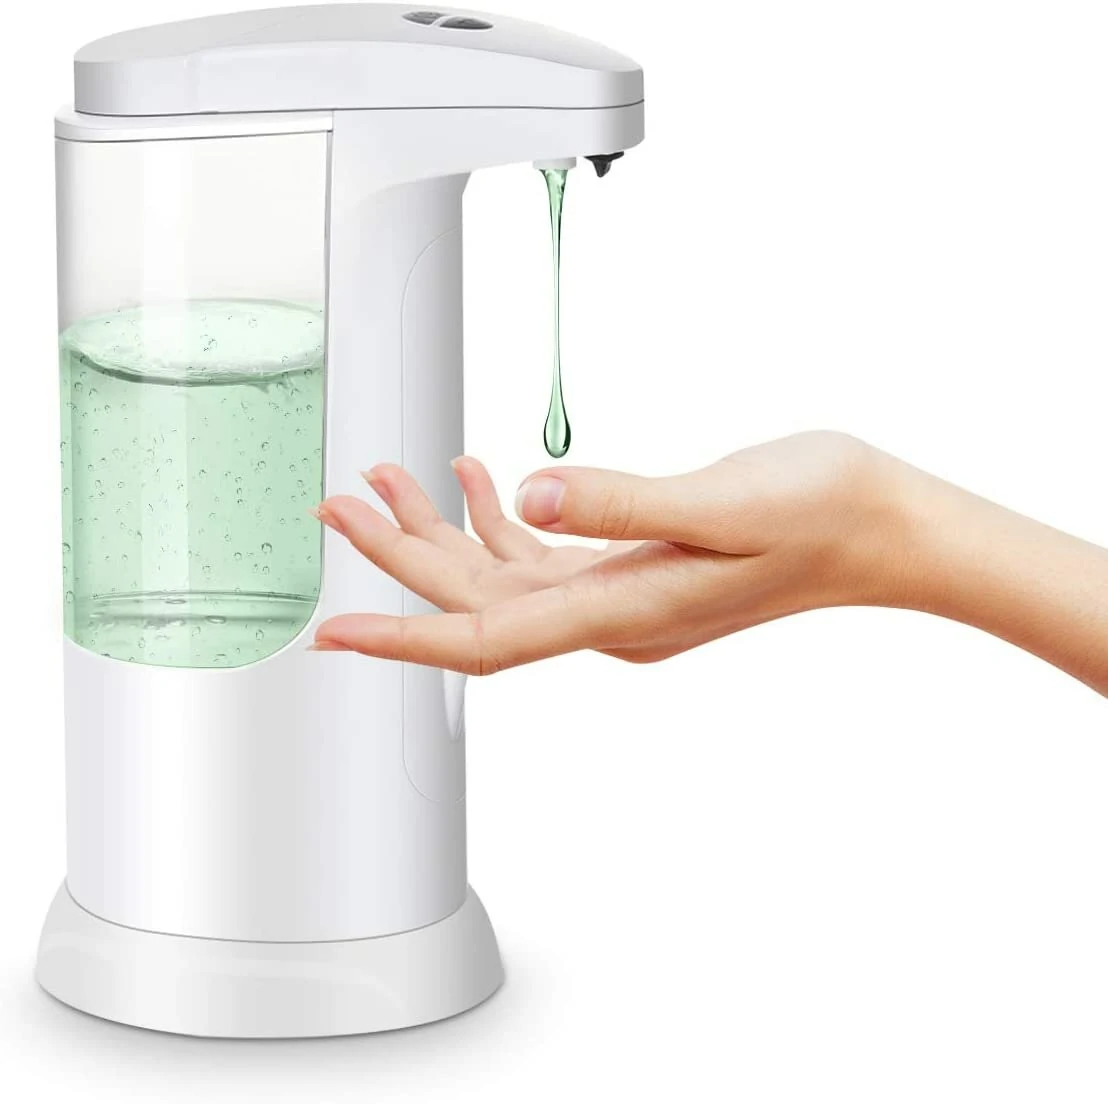 MECO ELEVERDE Automatic Soap Dispenser 3 Adjustable Modes Soap Quantity Non-Contact Electric Disinfectant Dispenser with Screen Display for Office Hotel Restaurant School (370 ml) - Off White